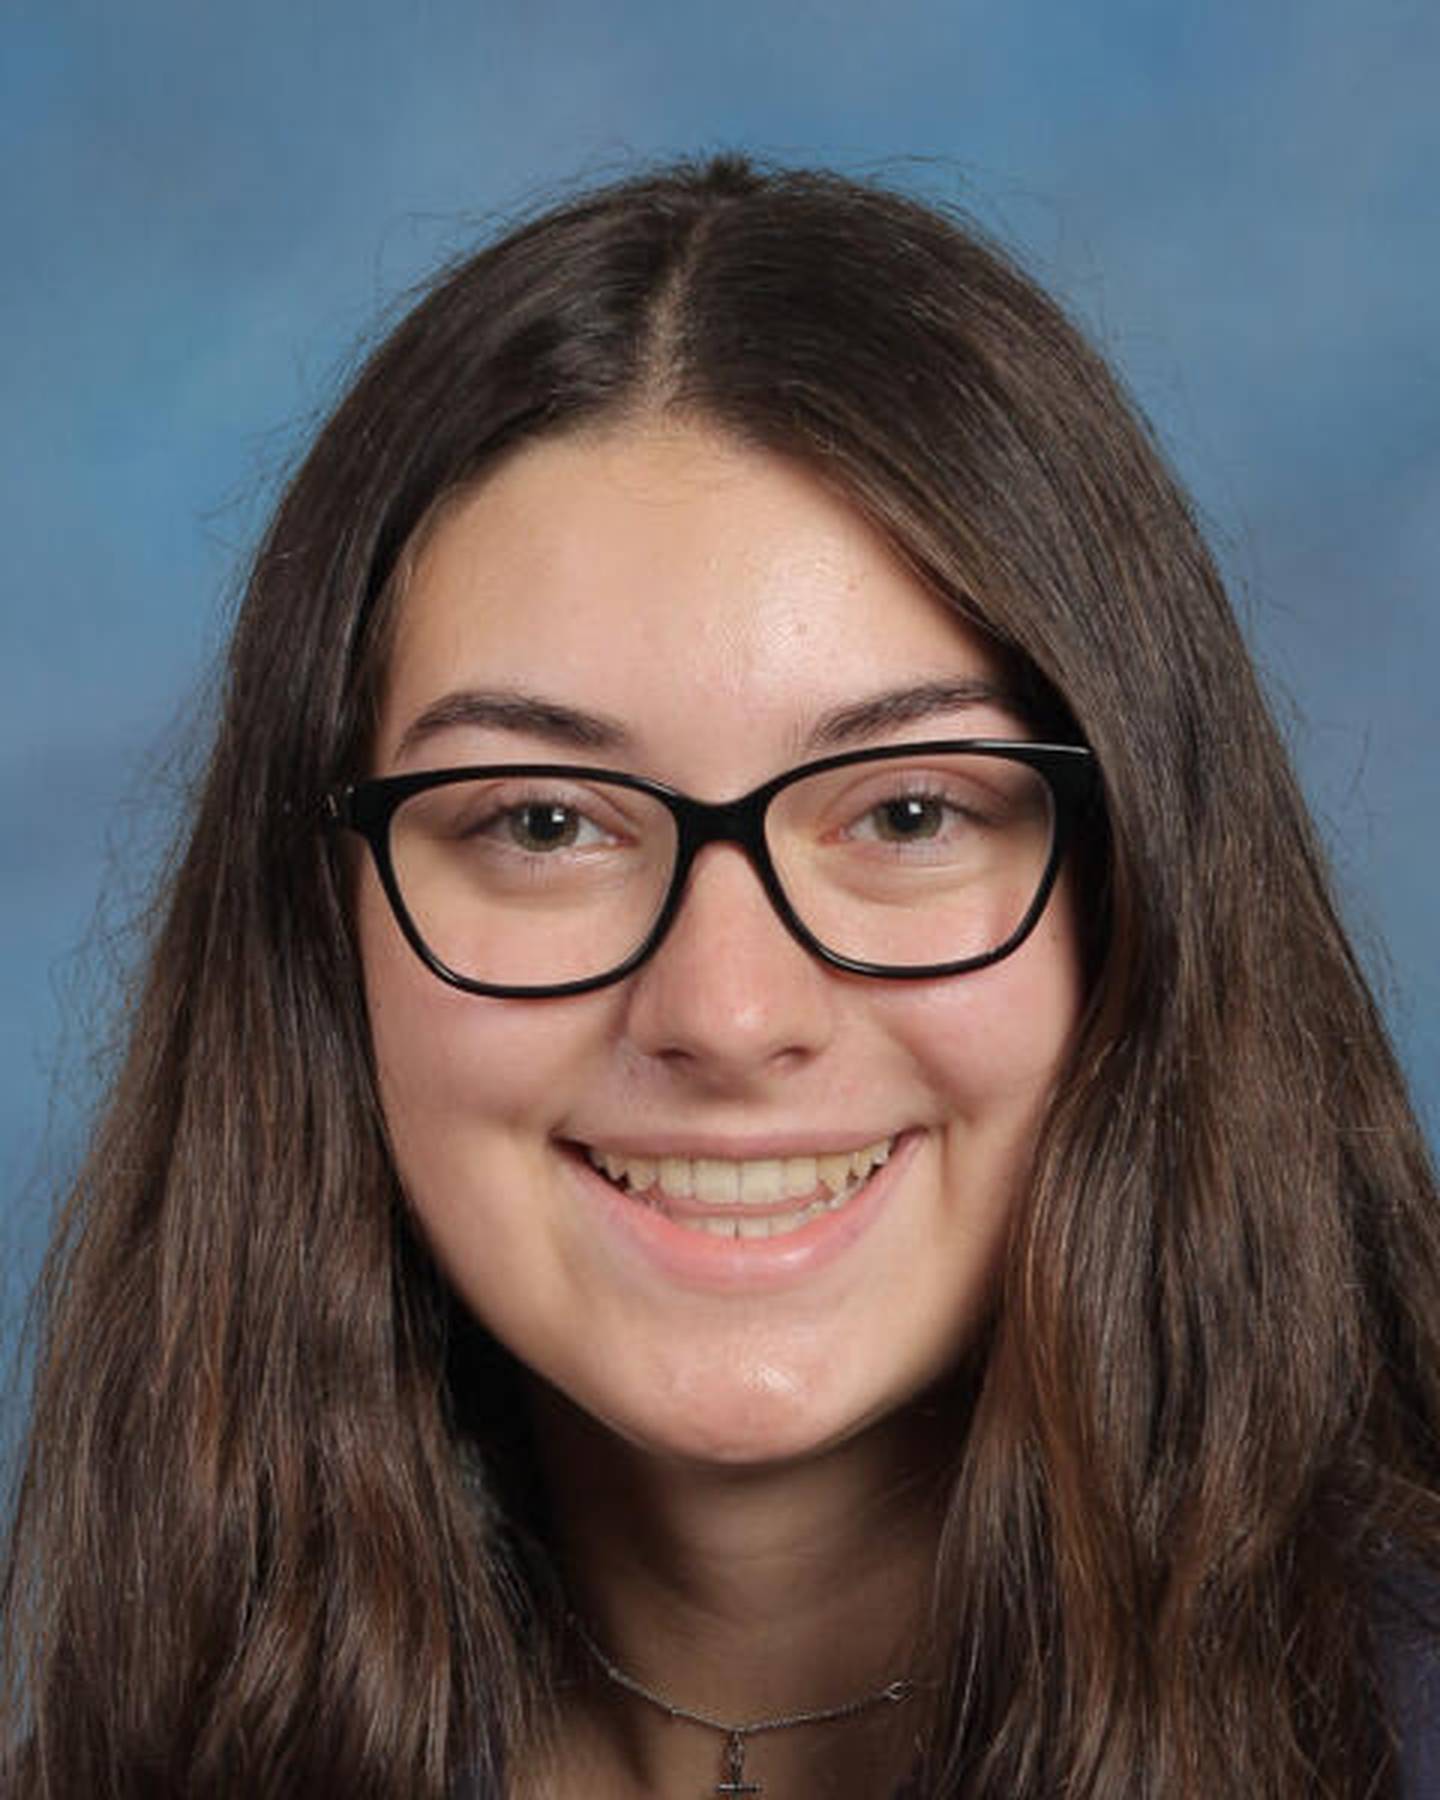 Joliet Catholic Academy named Abigail Weiss as a Student of the Month for November 2021.